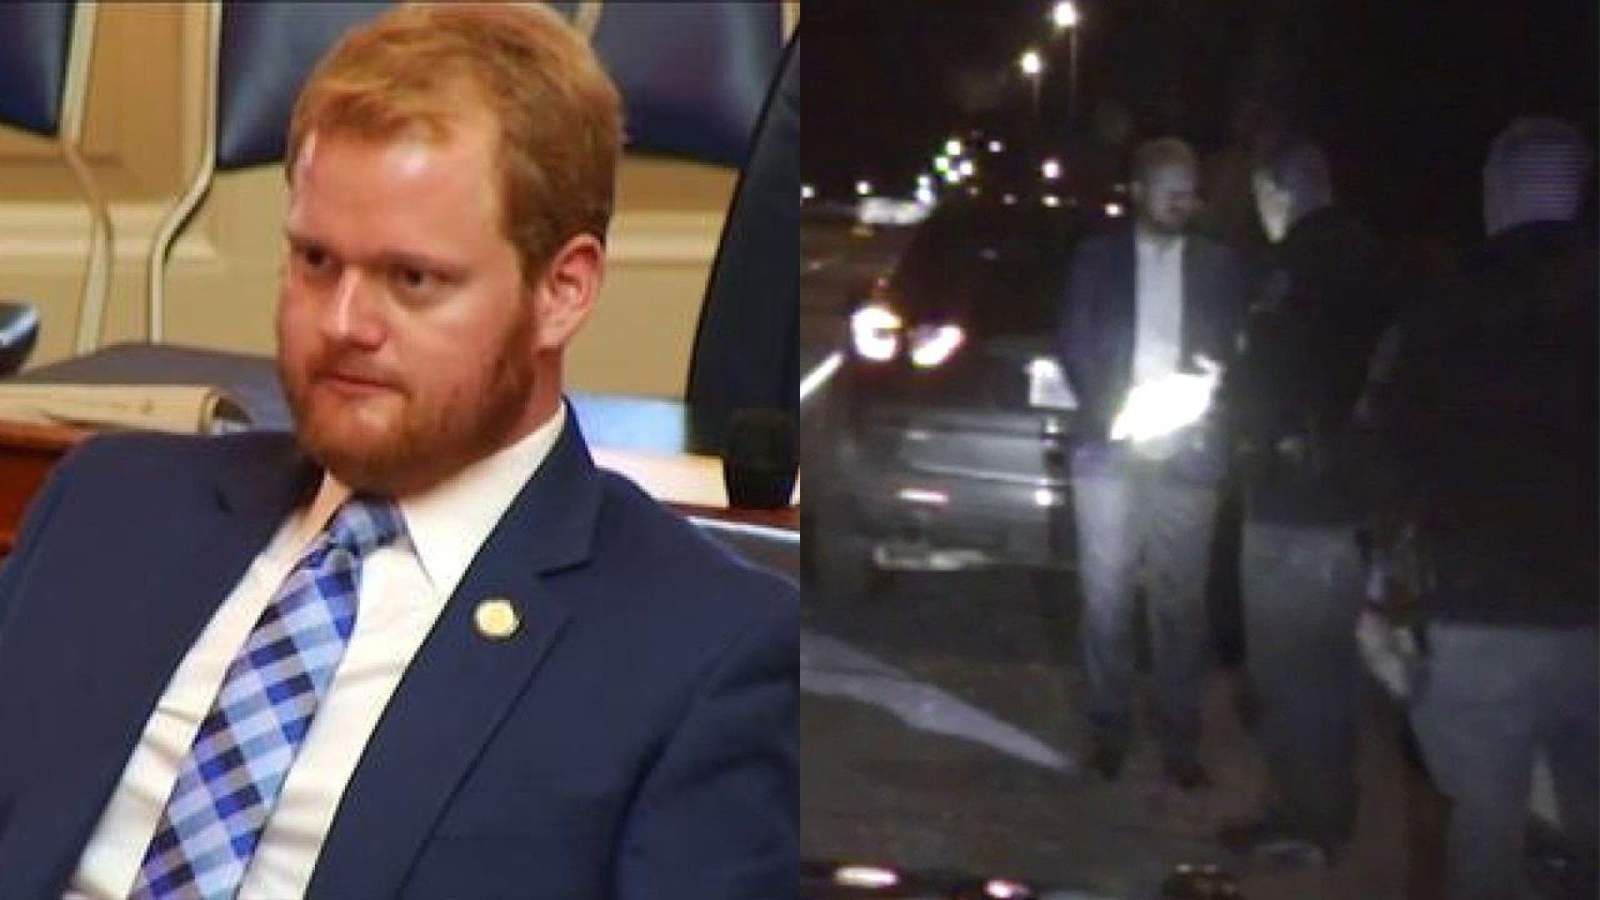 Police say no wrongdoing found in traffic stop involving Del. Chris Hurst